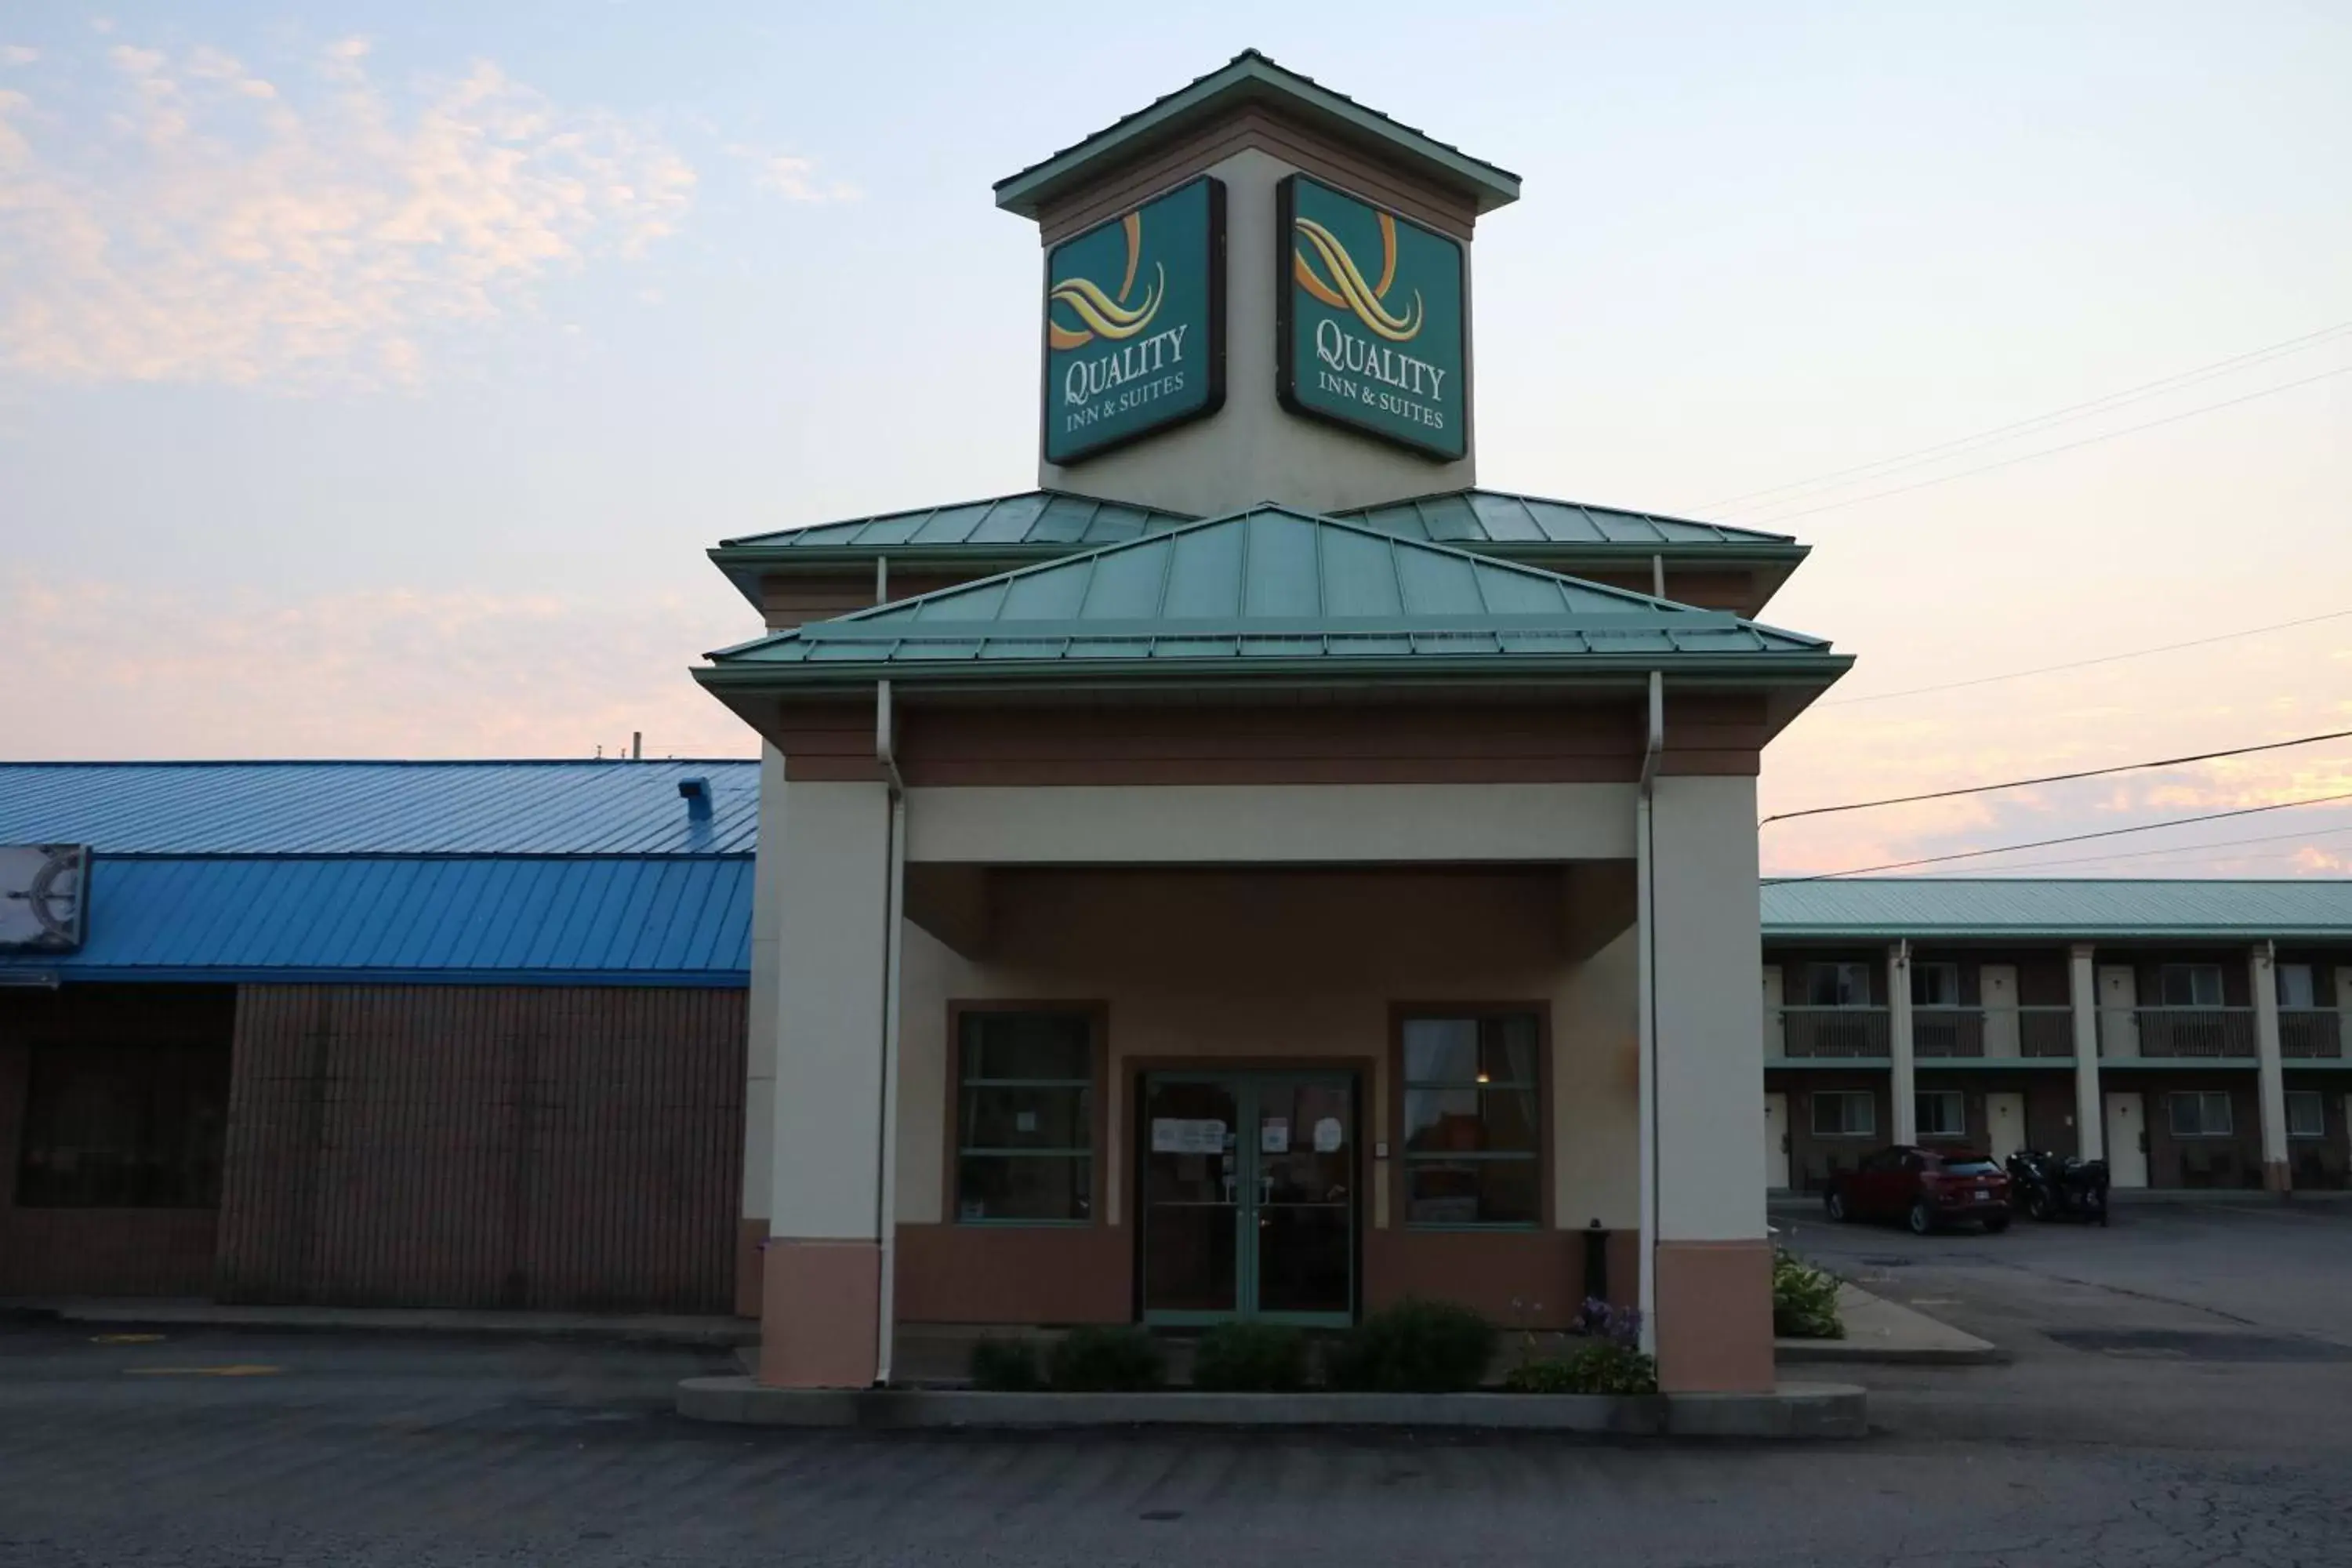 Property Building in Quality Inn & Suites 1000 Islands